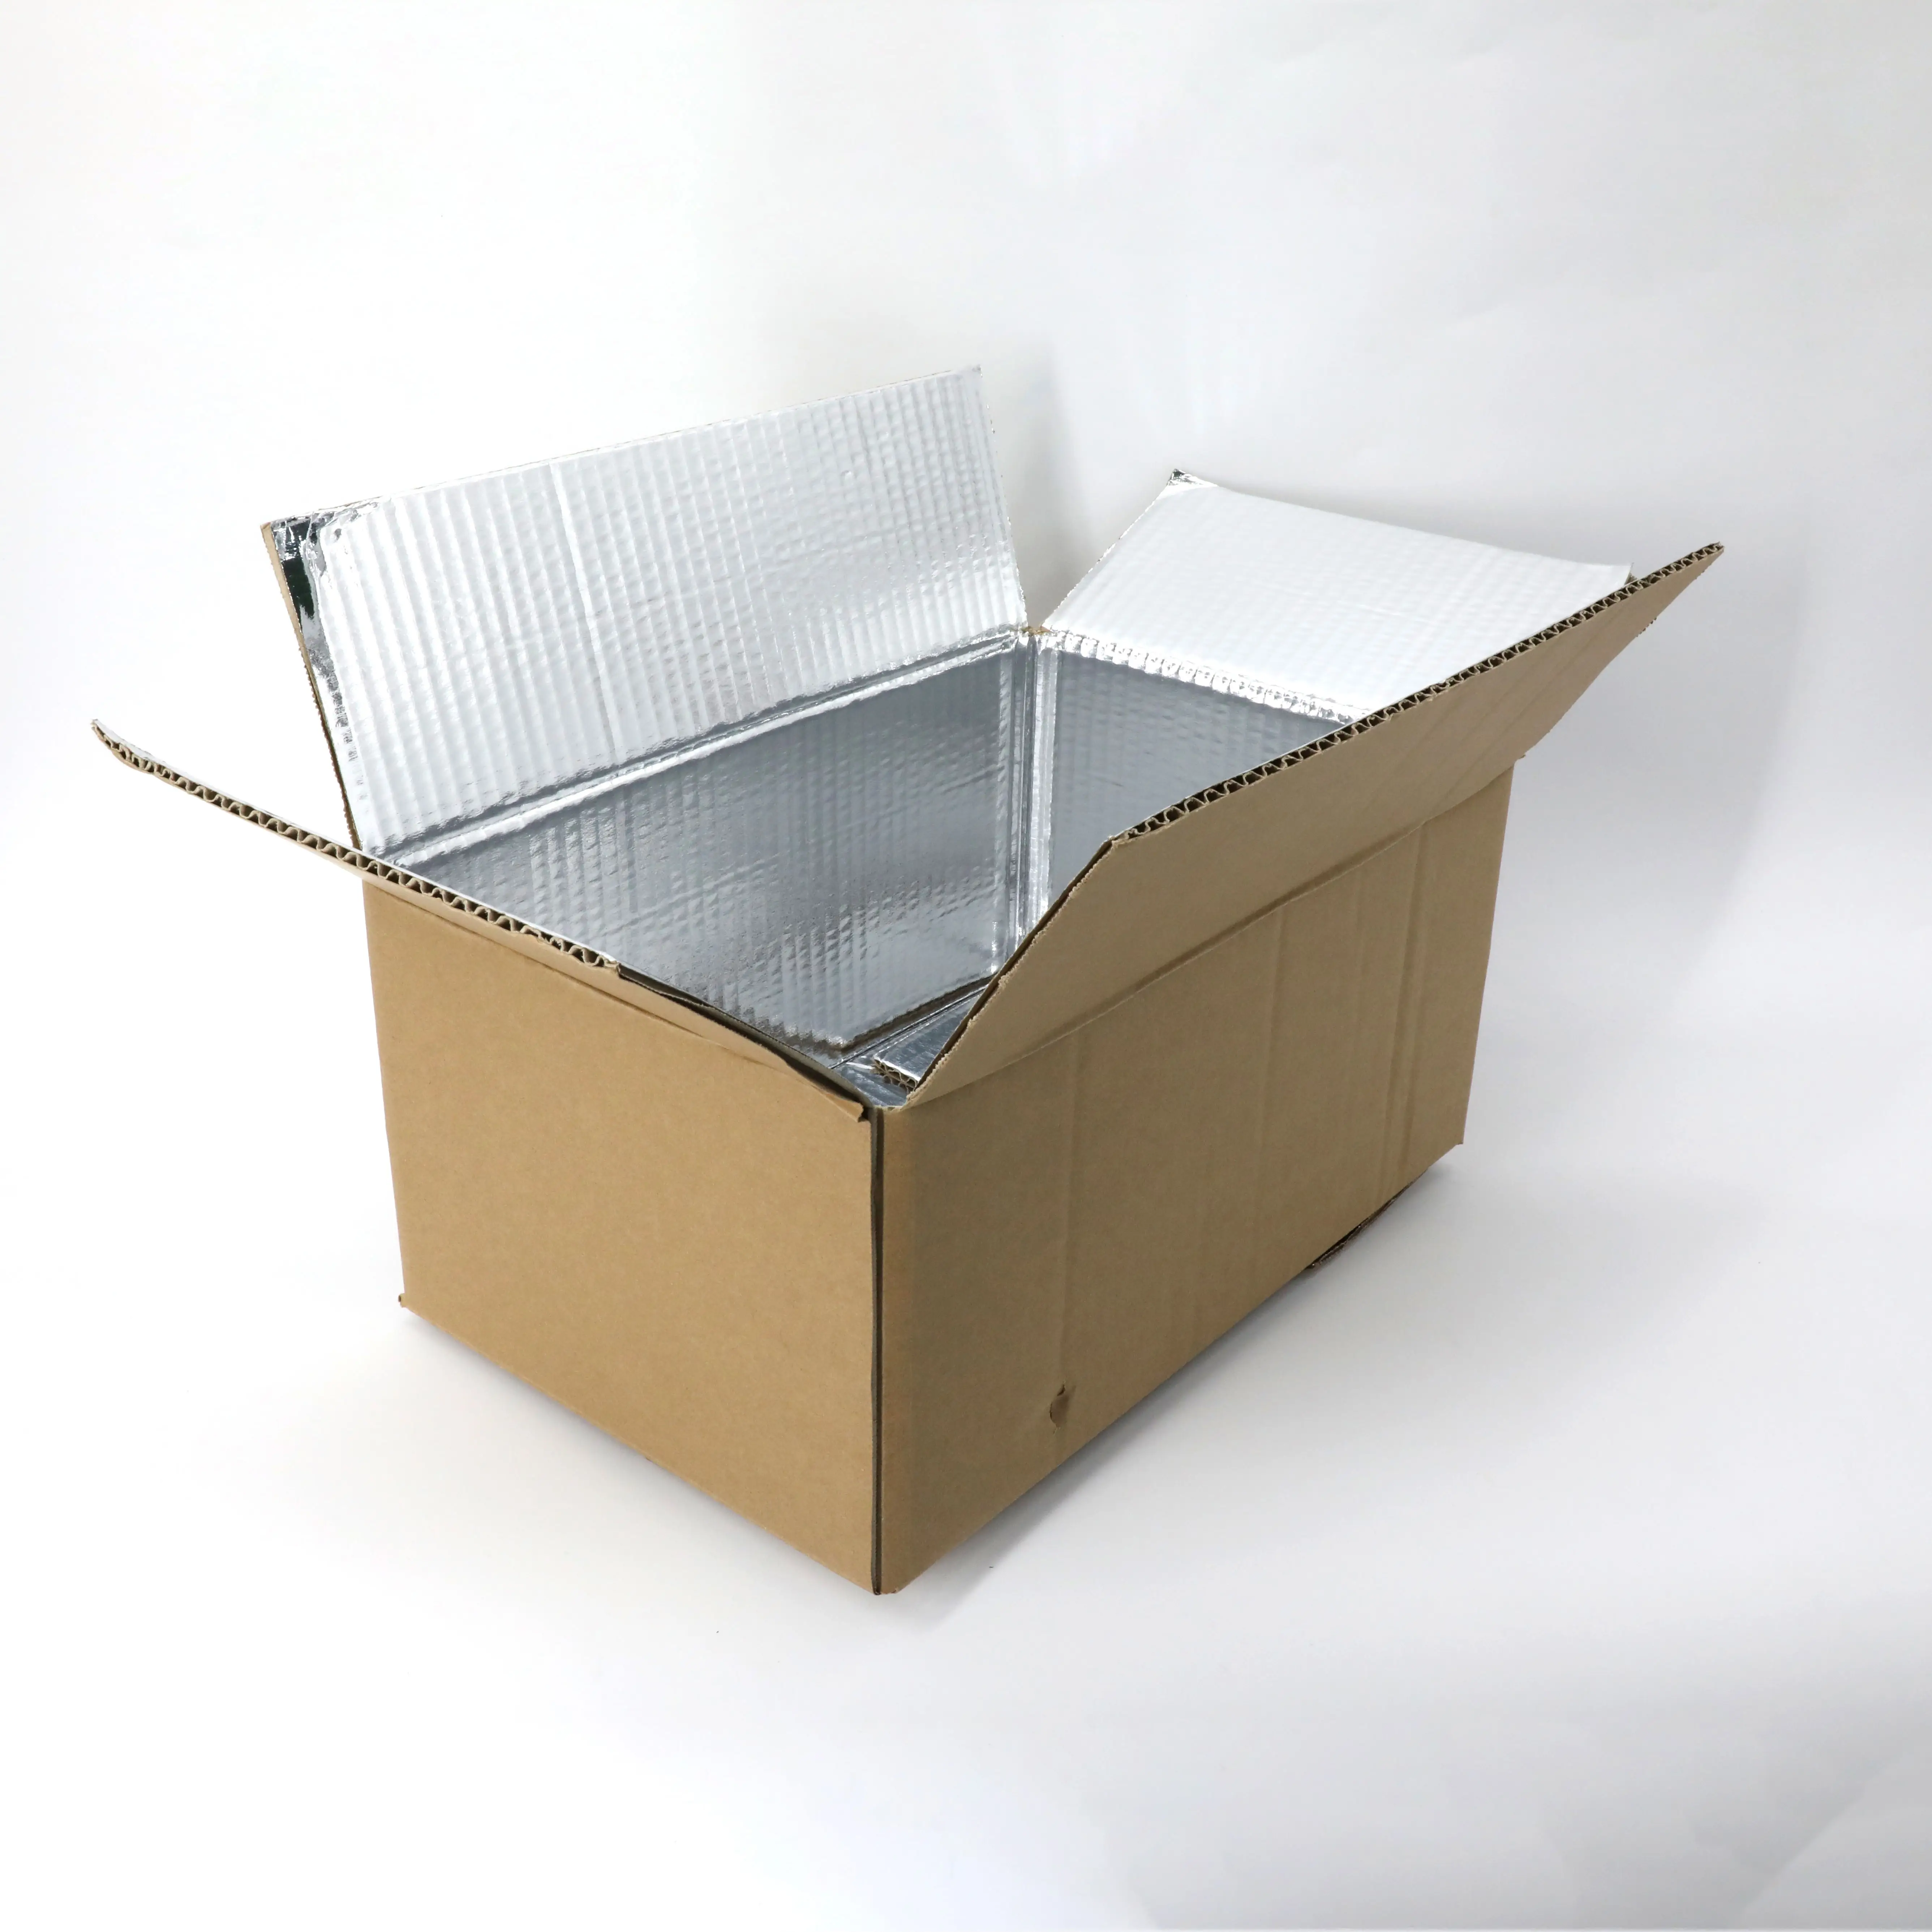 Carton Box Fish Vegetables Styrofoam Insulated Shipping Boxes For Frozen Food